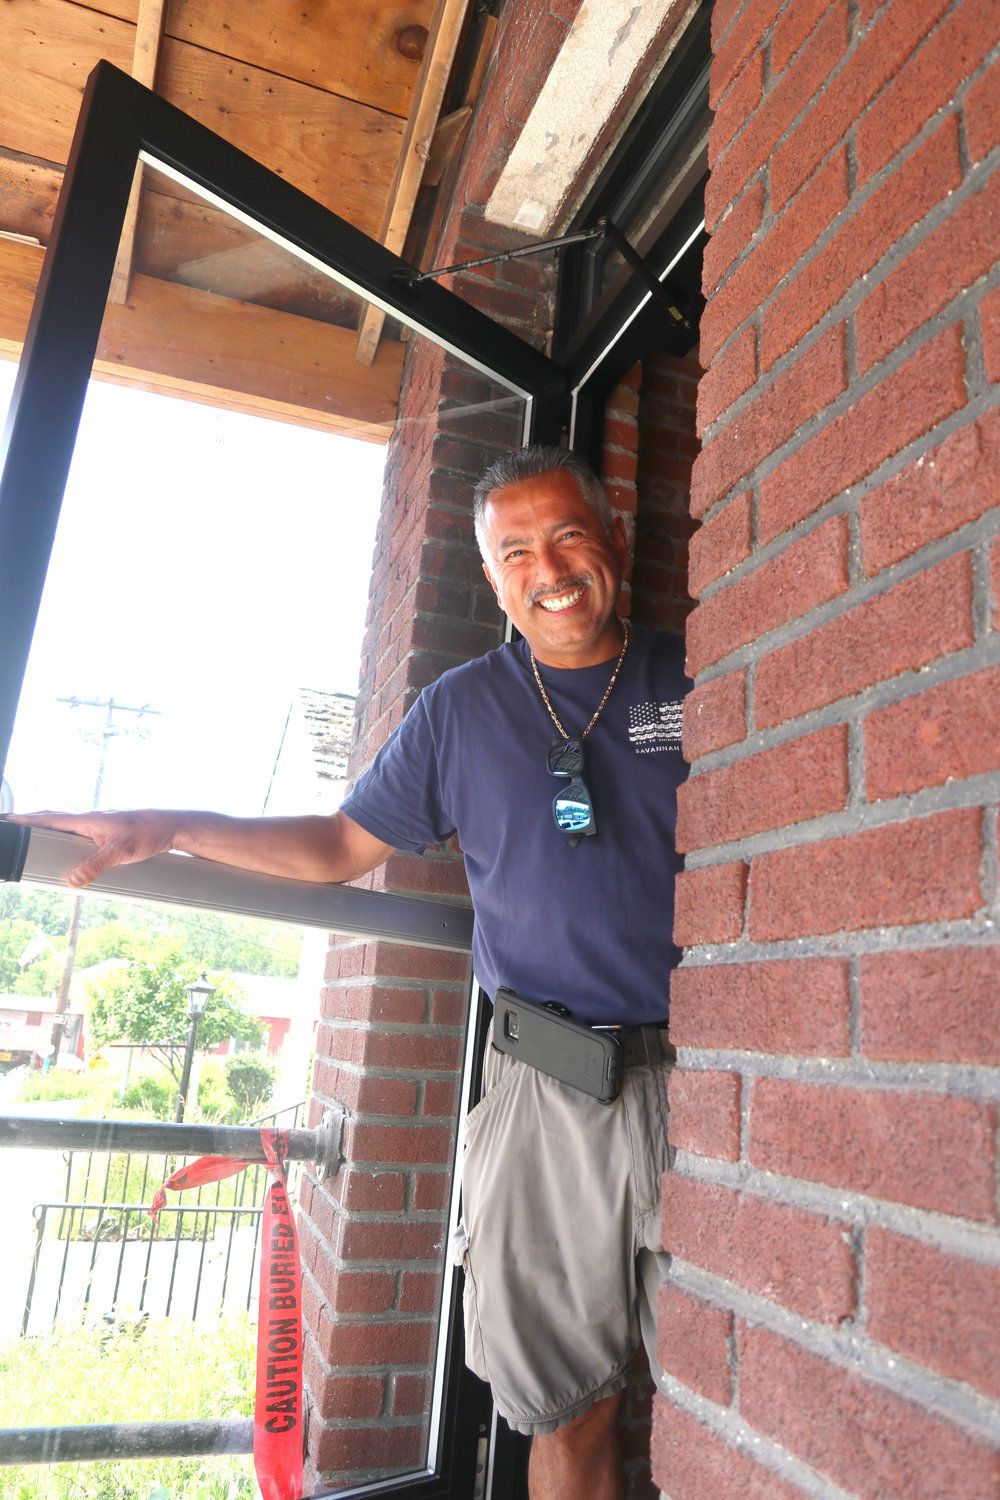 Nick Santana stands in one of the newly installed doorways that will lead to the Narrowsburg Shops & Market,  a multi-space commercial building, on Main Street.